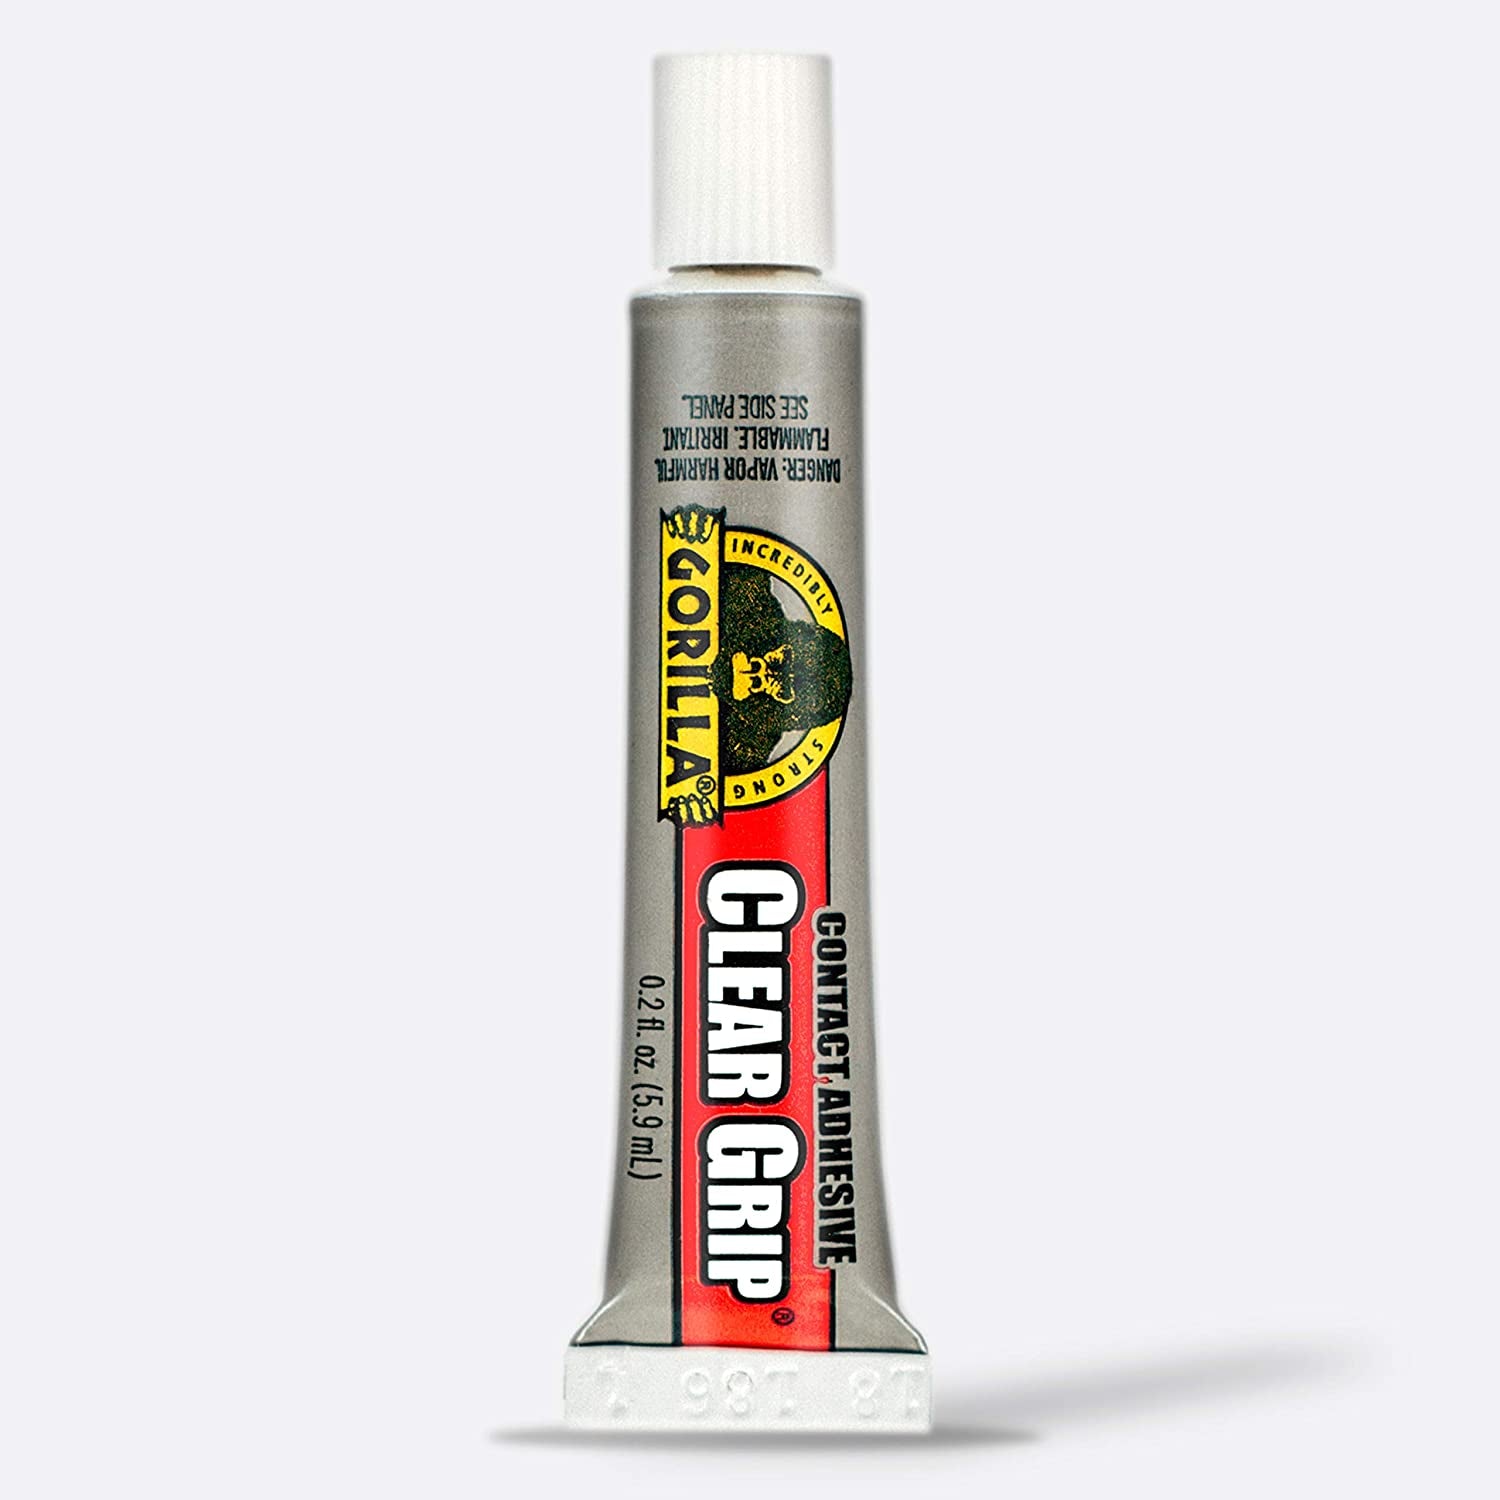 Gorilla, Gorilla Clear Grip Contact Adhesive Minis, Flexible, Fast-Setting, Permanent Bond, Waterproof, Indoor & Outdoor, Paintable, 4-5.9Ml Tubes, Clear, (Pack of 1), GG102057